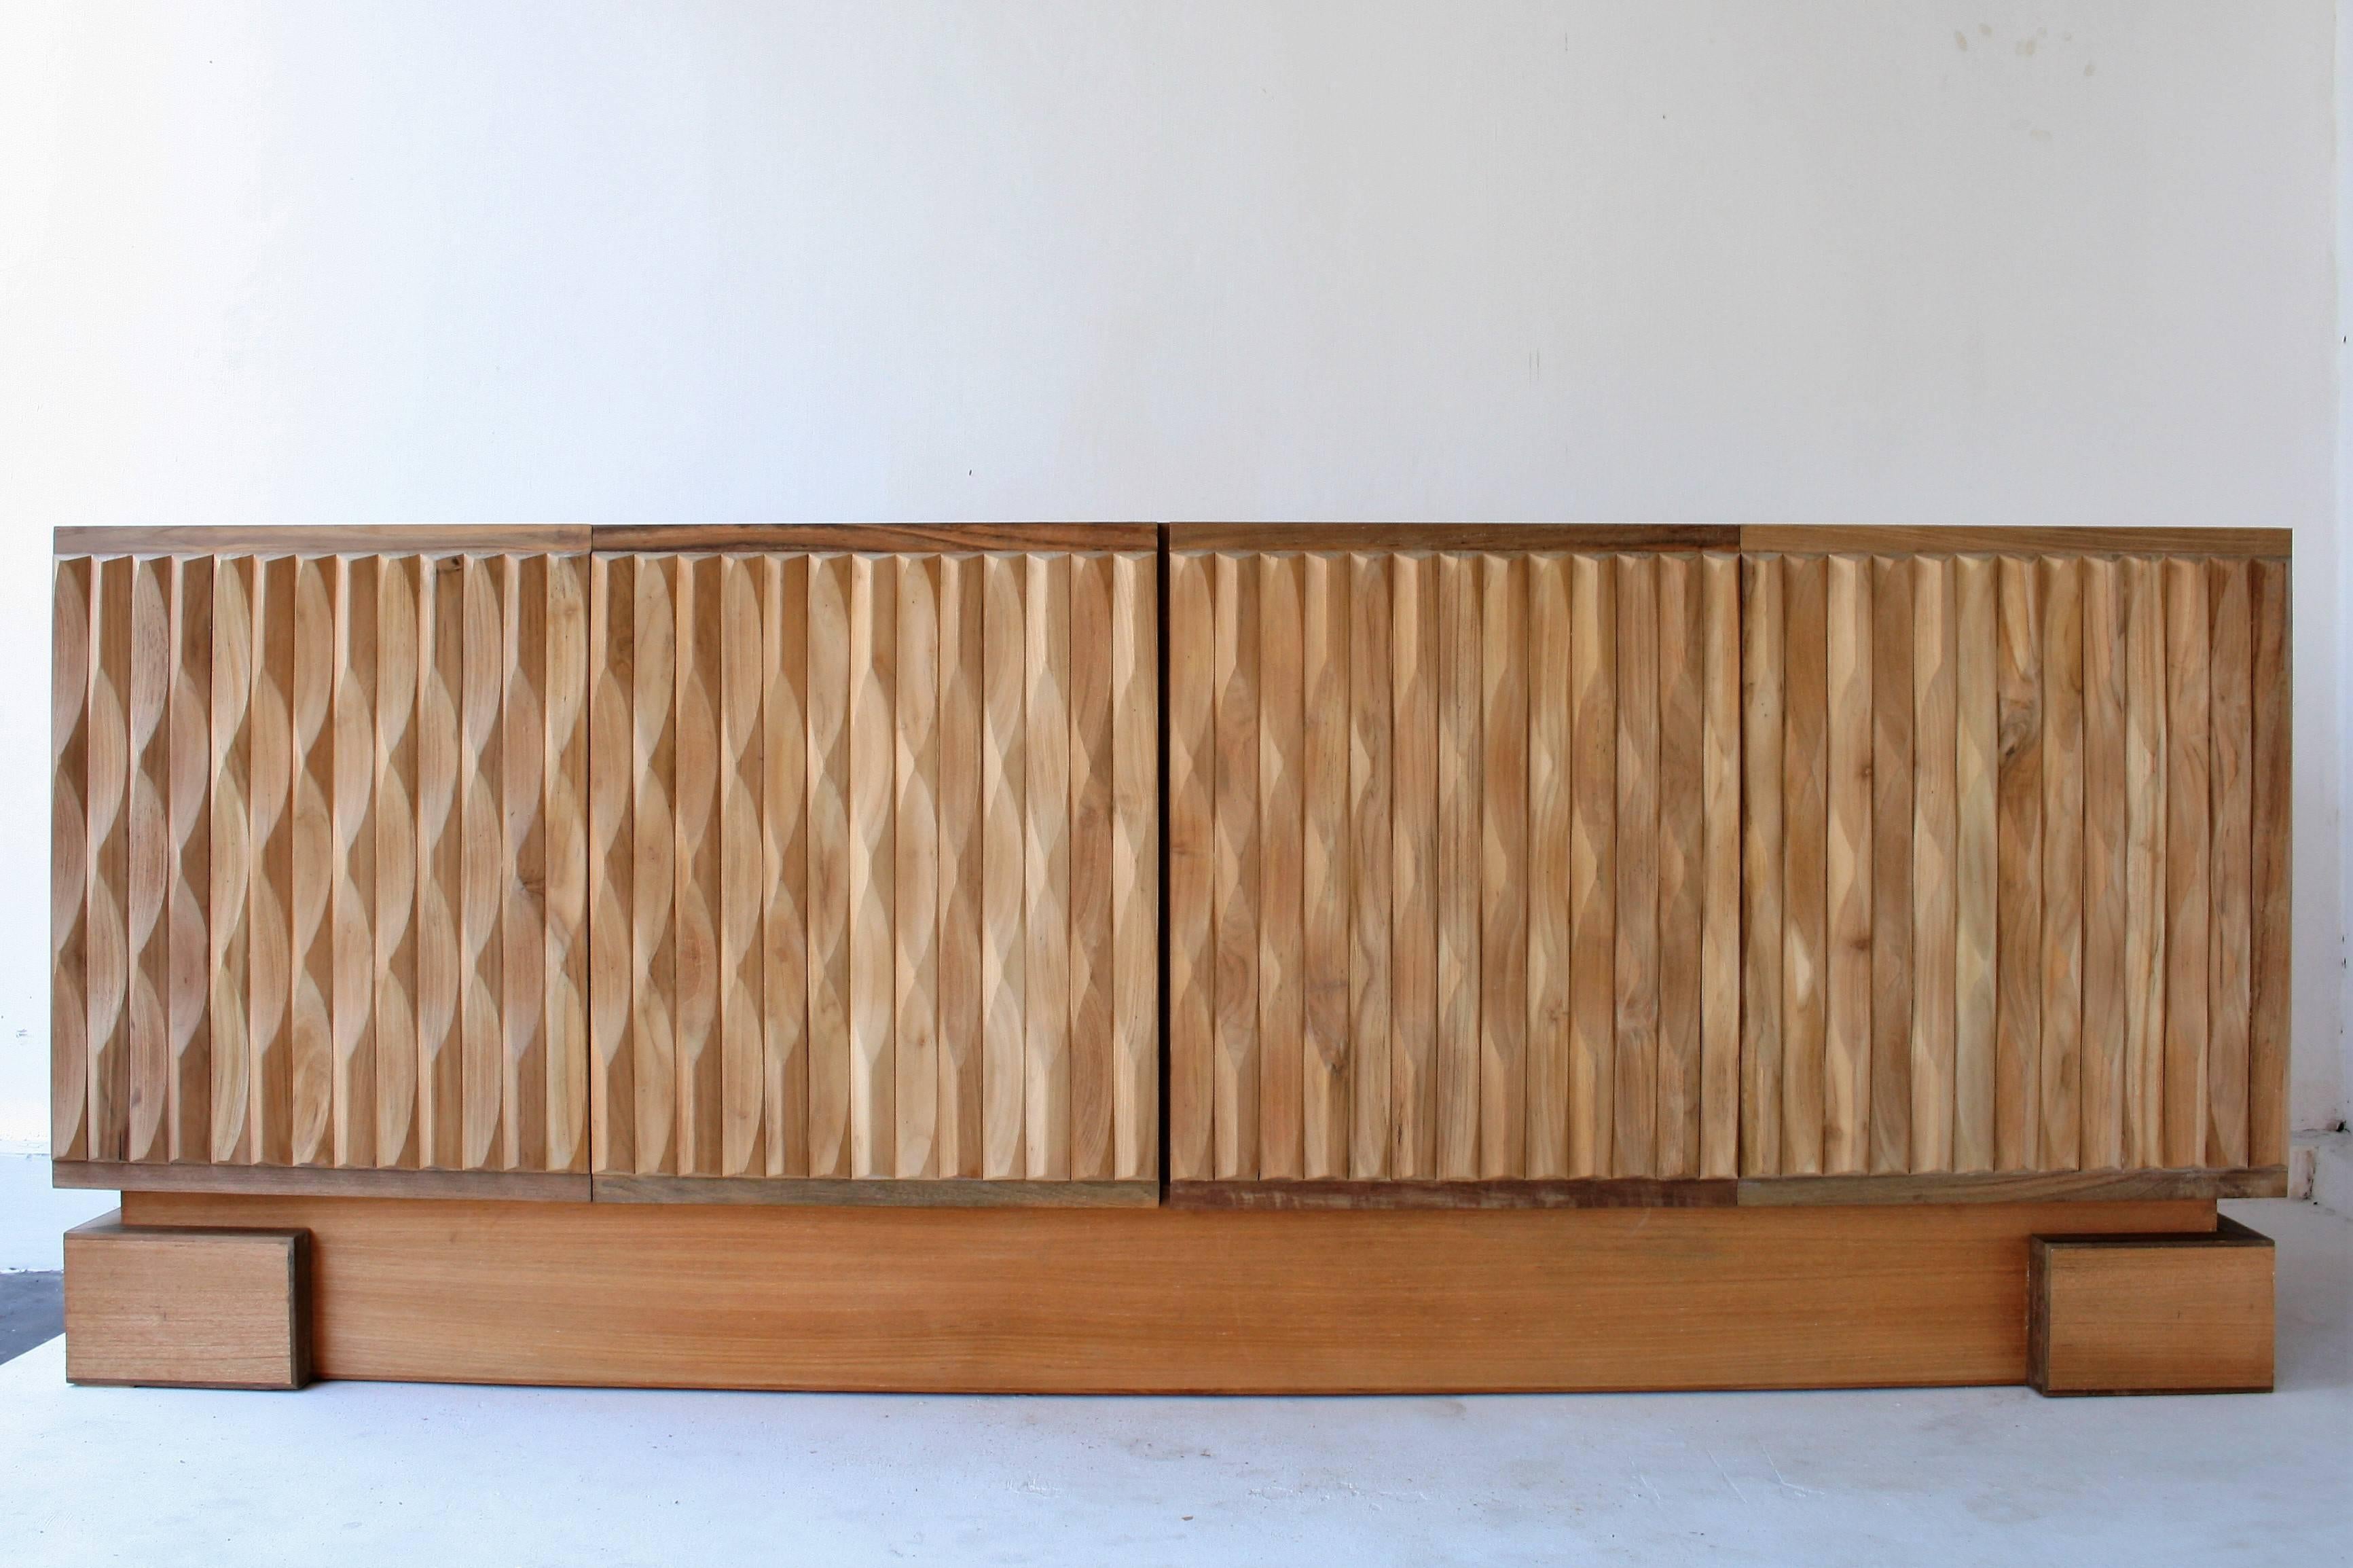 This sculptural sideboard has solid wooden graphic panels which makes it a very heavy quality. We cleaned and stripped them completely. We finished them with a natural oil so they look fantastic, with only minor wear. Italian prameta hinges.
They